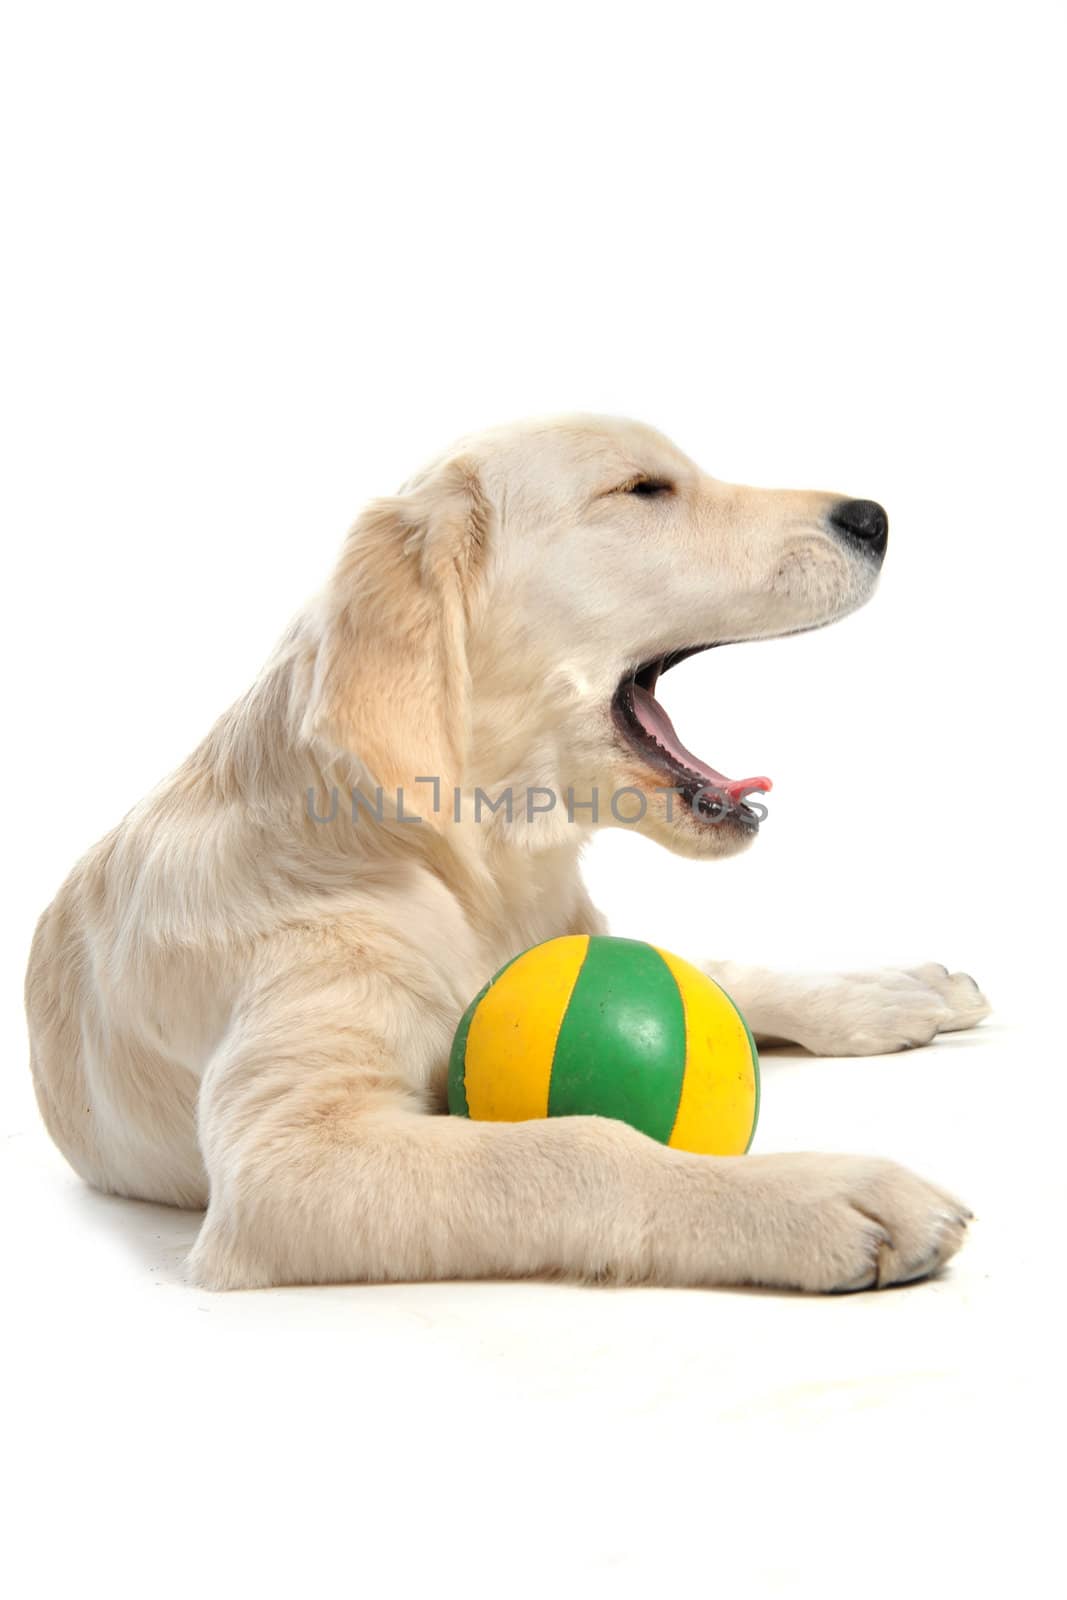 yawning purebred puppy golden retriever in front of a white 